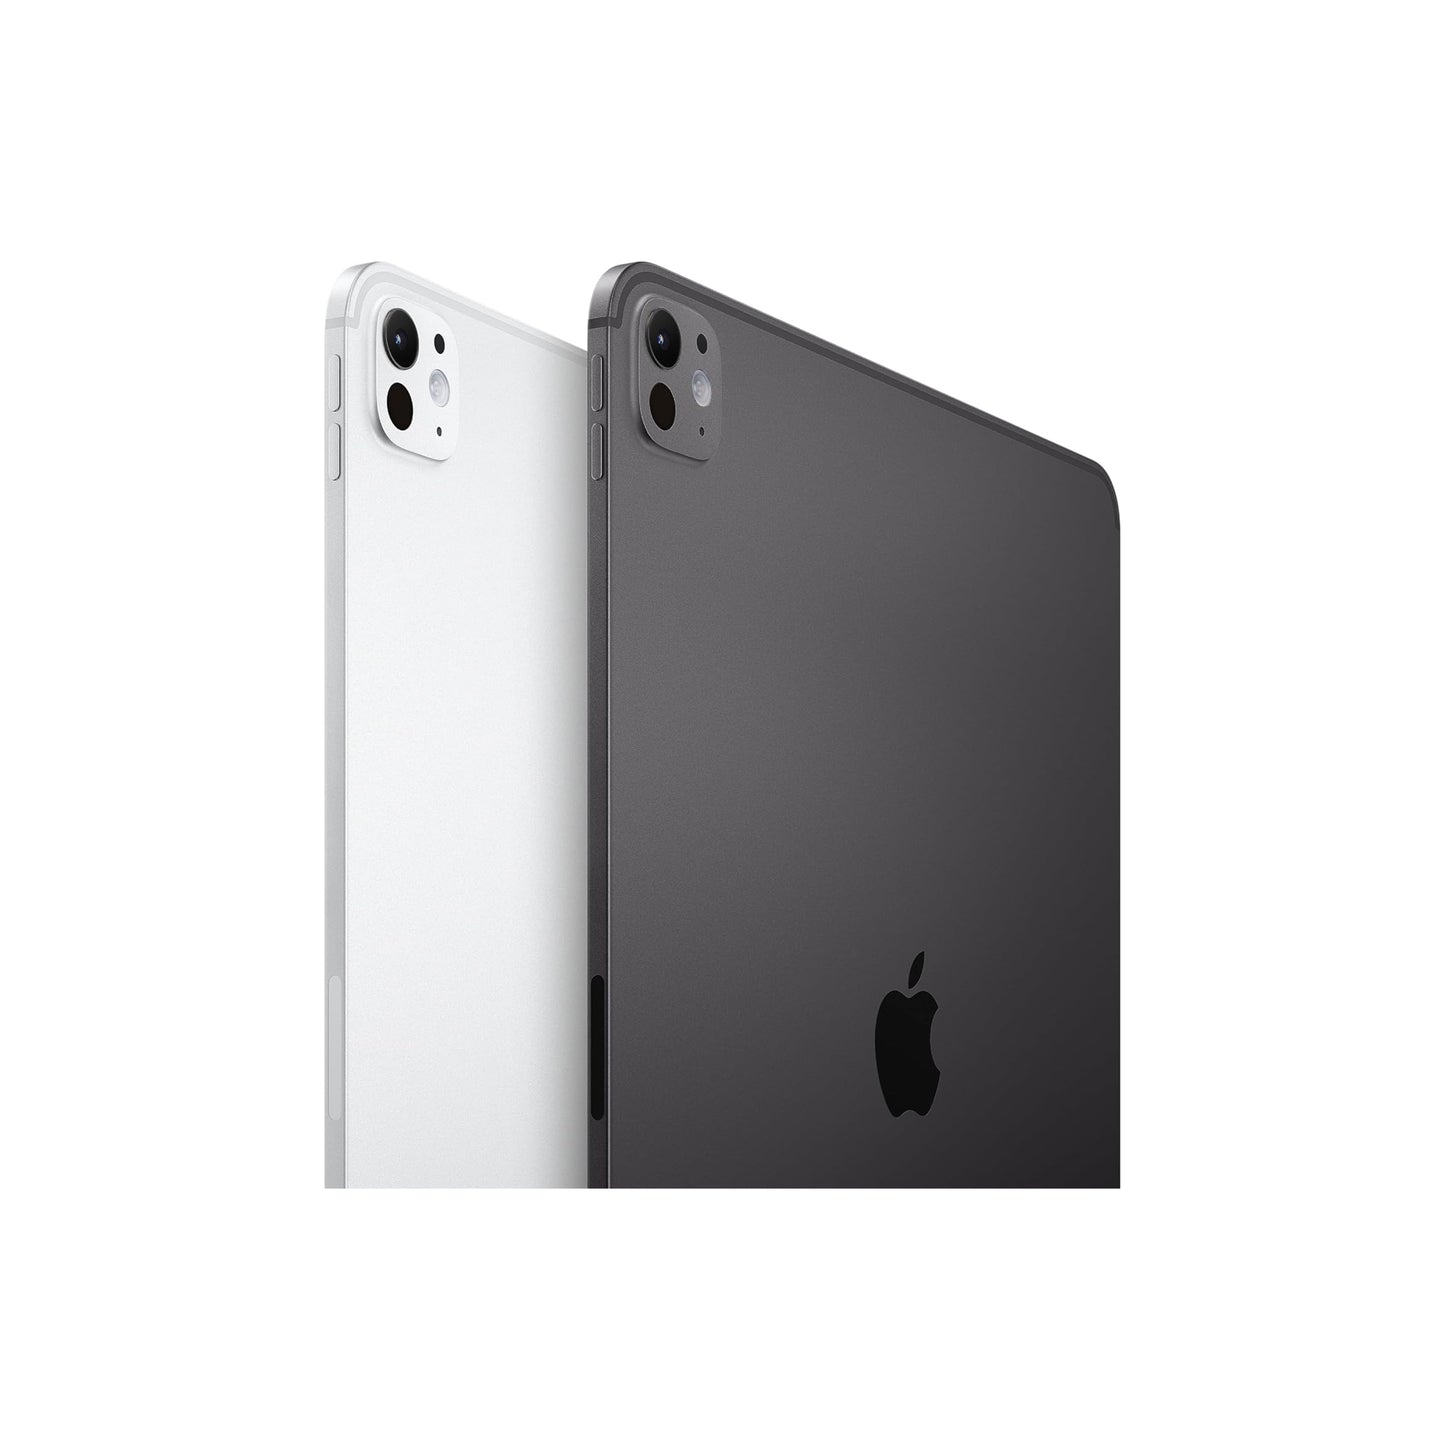 Apple iPad Pro 13-Inch (M4): Ultra Retina XDR Display - Nano-Texture Glass, 1TB, Landscape 12MP Front Camera/12MP Back Camera, LiDAR Scanner, Wi-Fi 6E, Face ID, All-Day Battery Life — Space Black